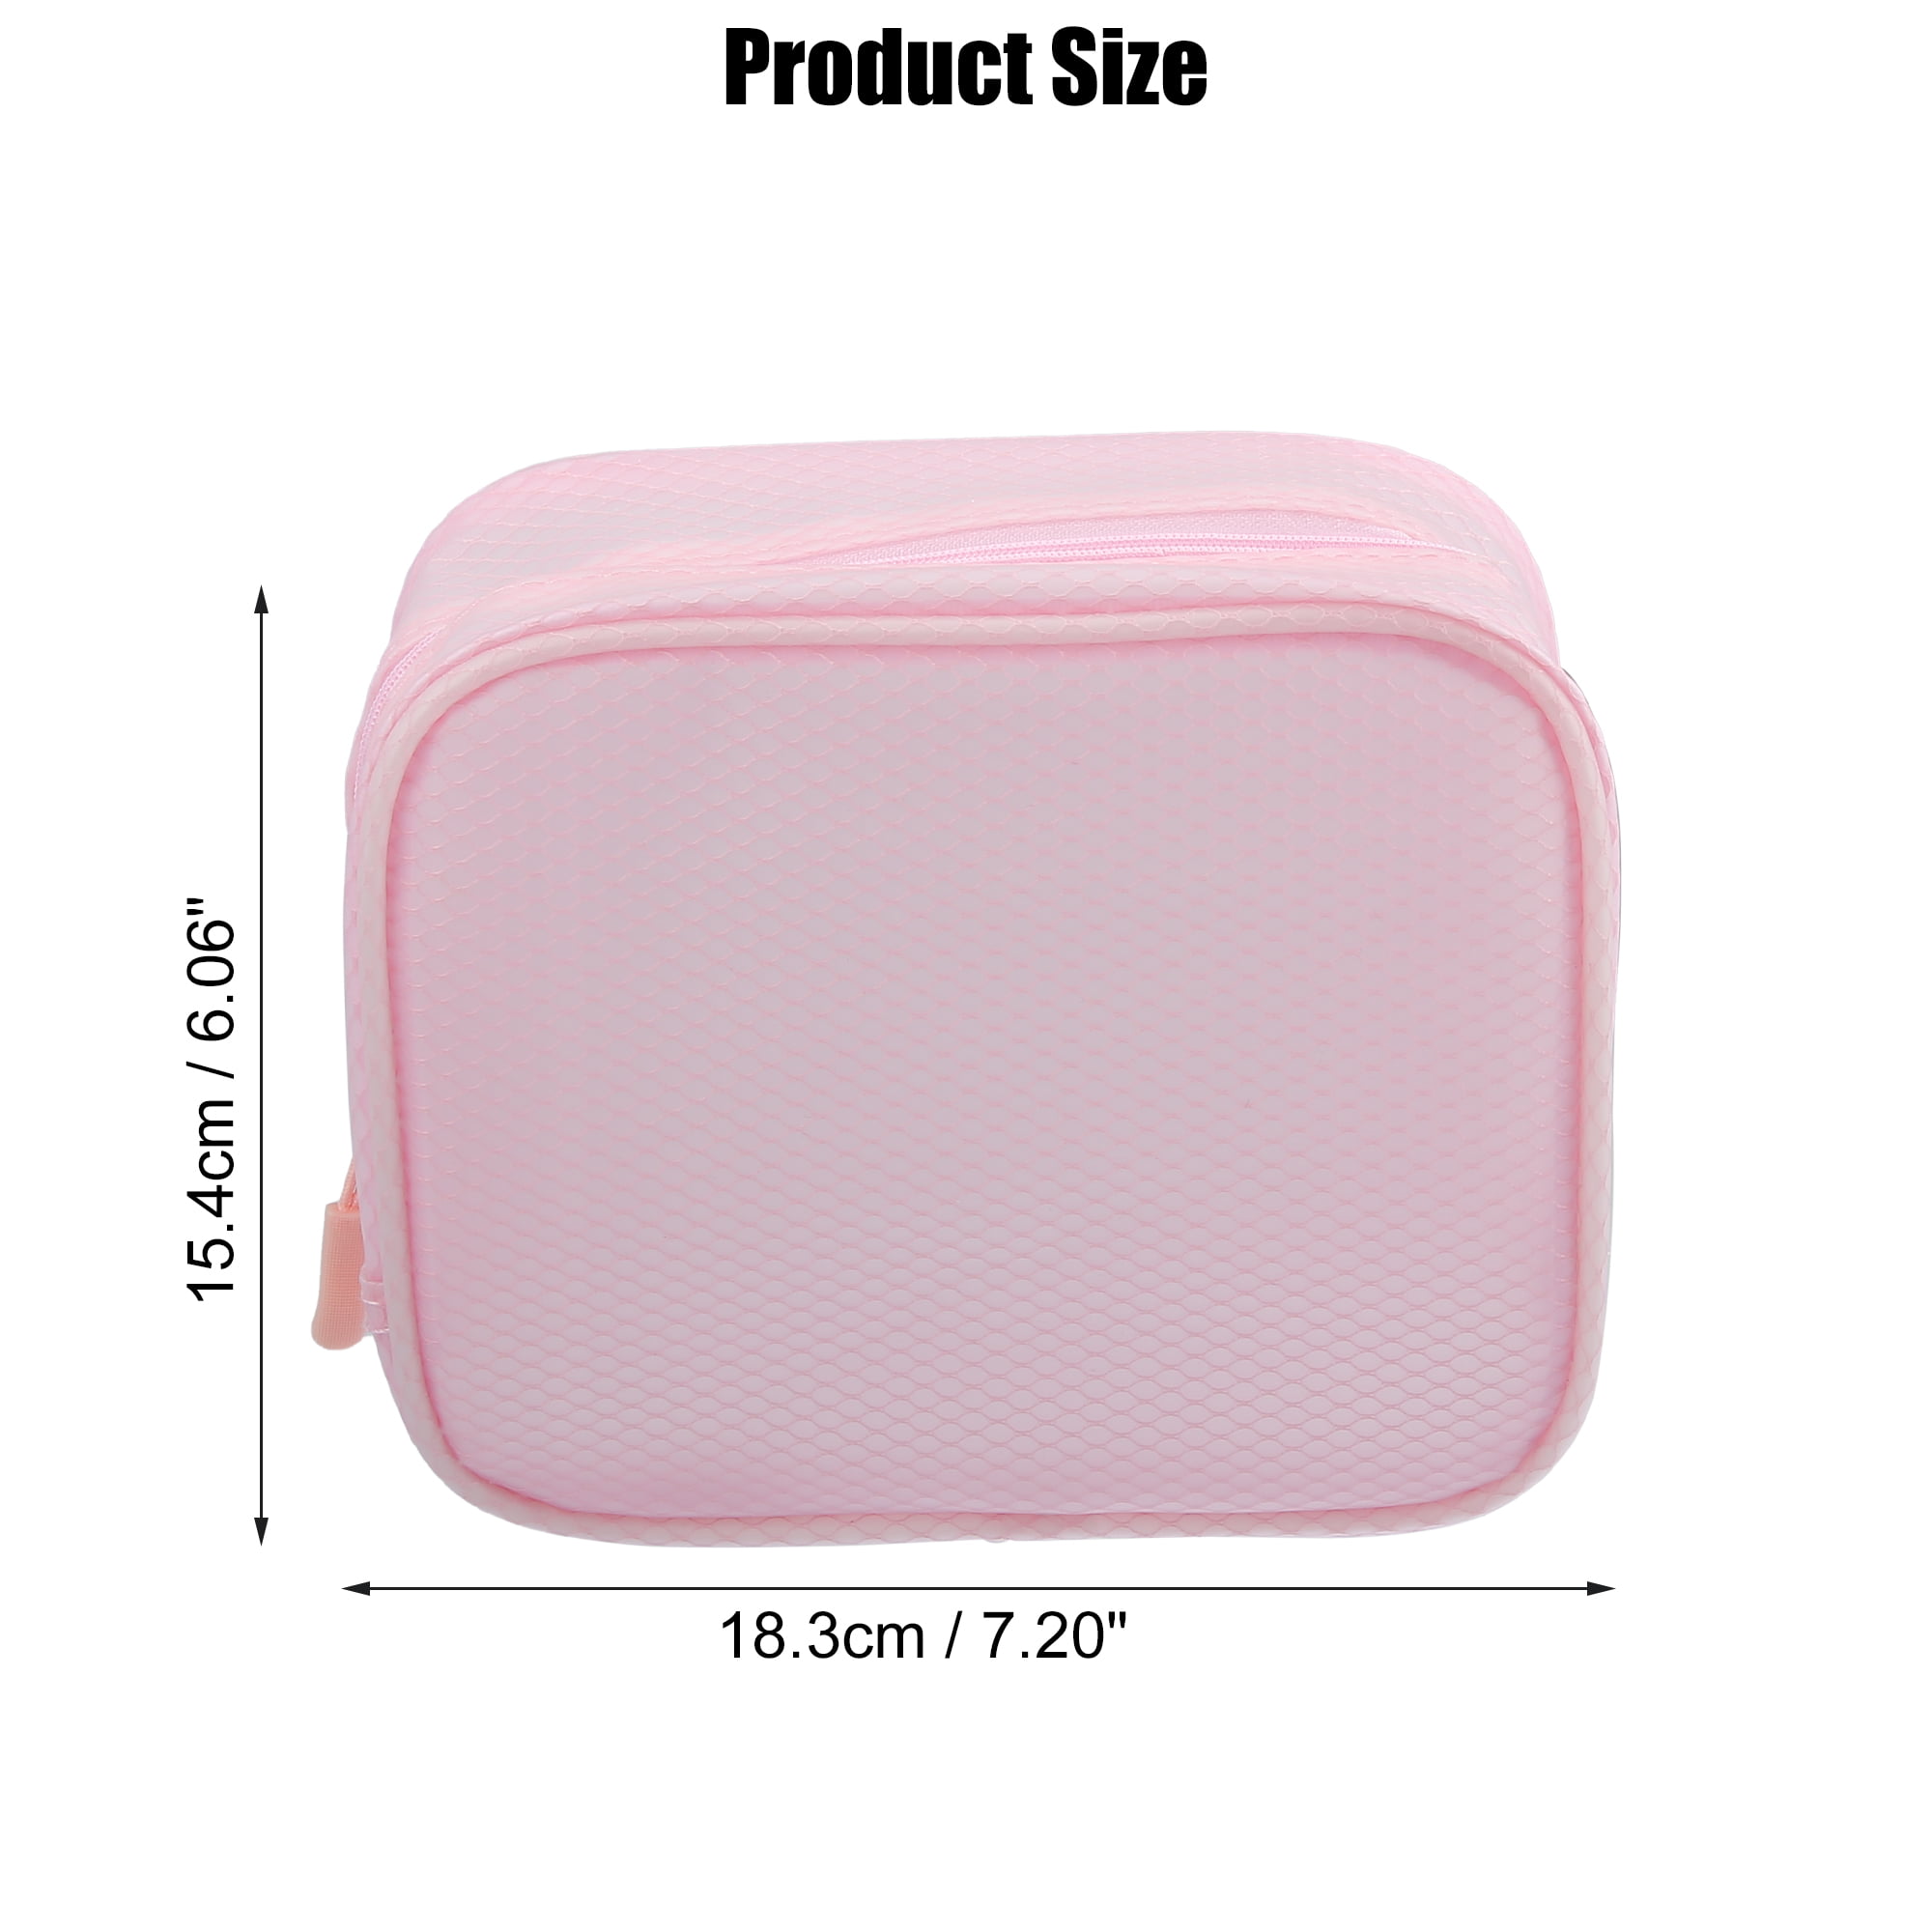 Cosmetic Bag - Makeup Bag Travel Pouch, Toiletry Bags Cute Makeup  Organizer, Nylon Zipper Pouches, Pink Coin Purse, Storage Bag Cosmetics  Organizer, Make up bags Women - Easehold Store – EASEHOLD